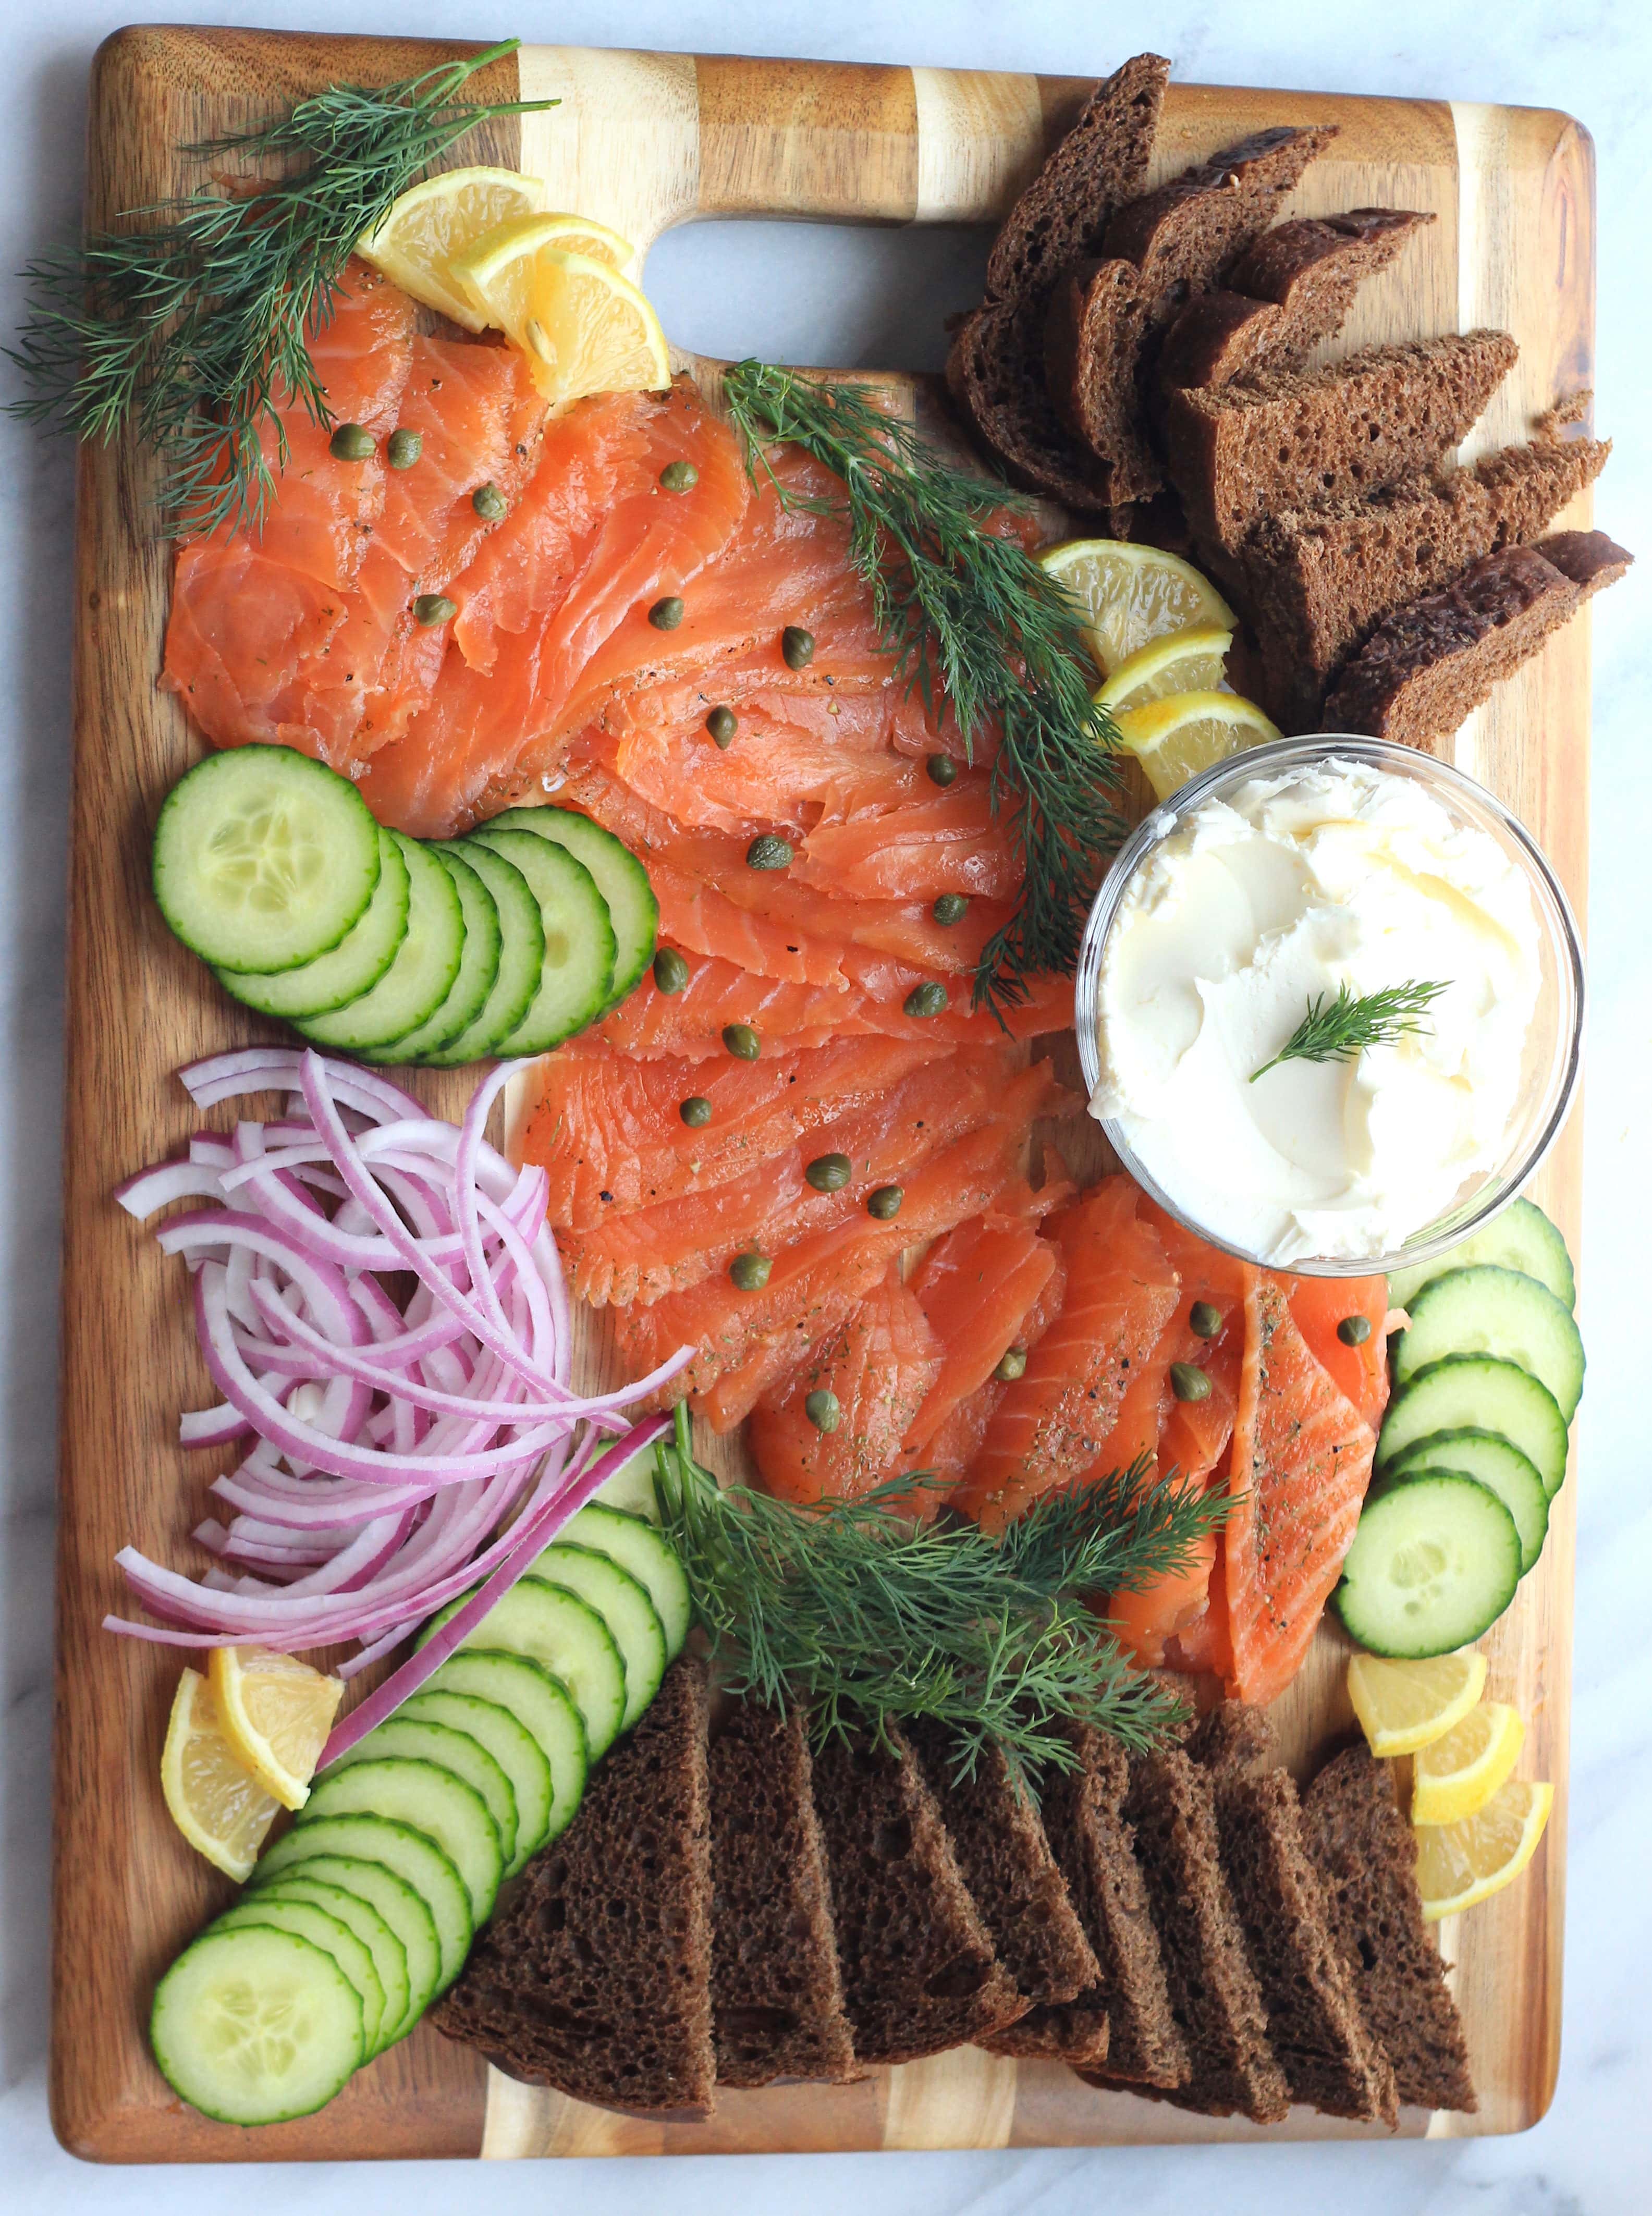 A wooden board topped with lox, capers, red onion, cucumbers, lemon wedges, fresh dill, sliced pumpernickel, and a bowl of cream cheese